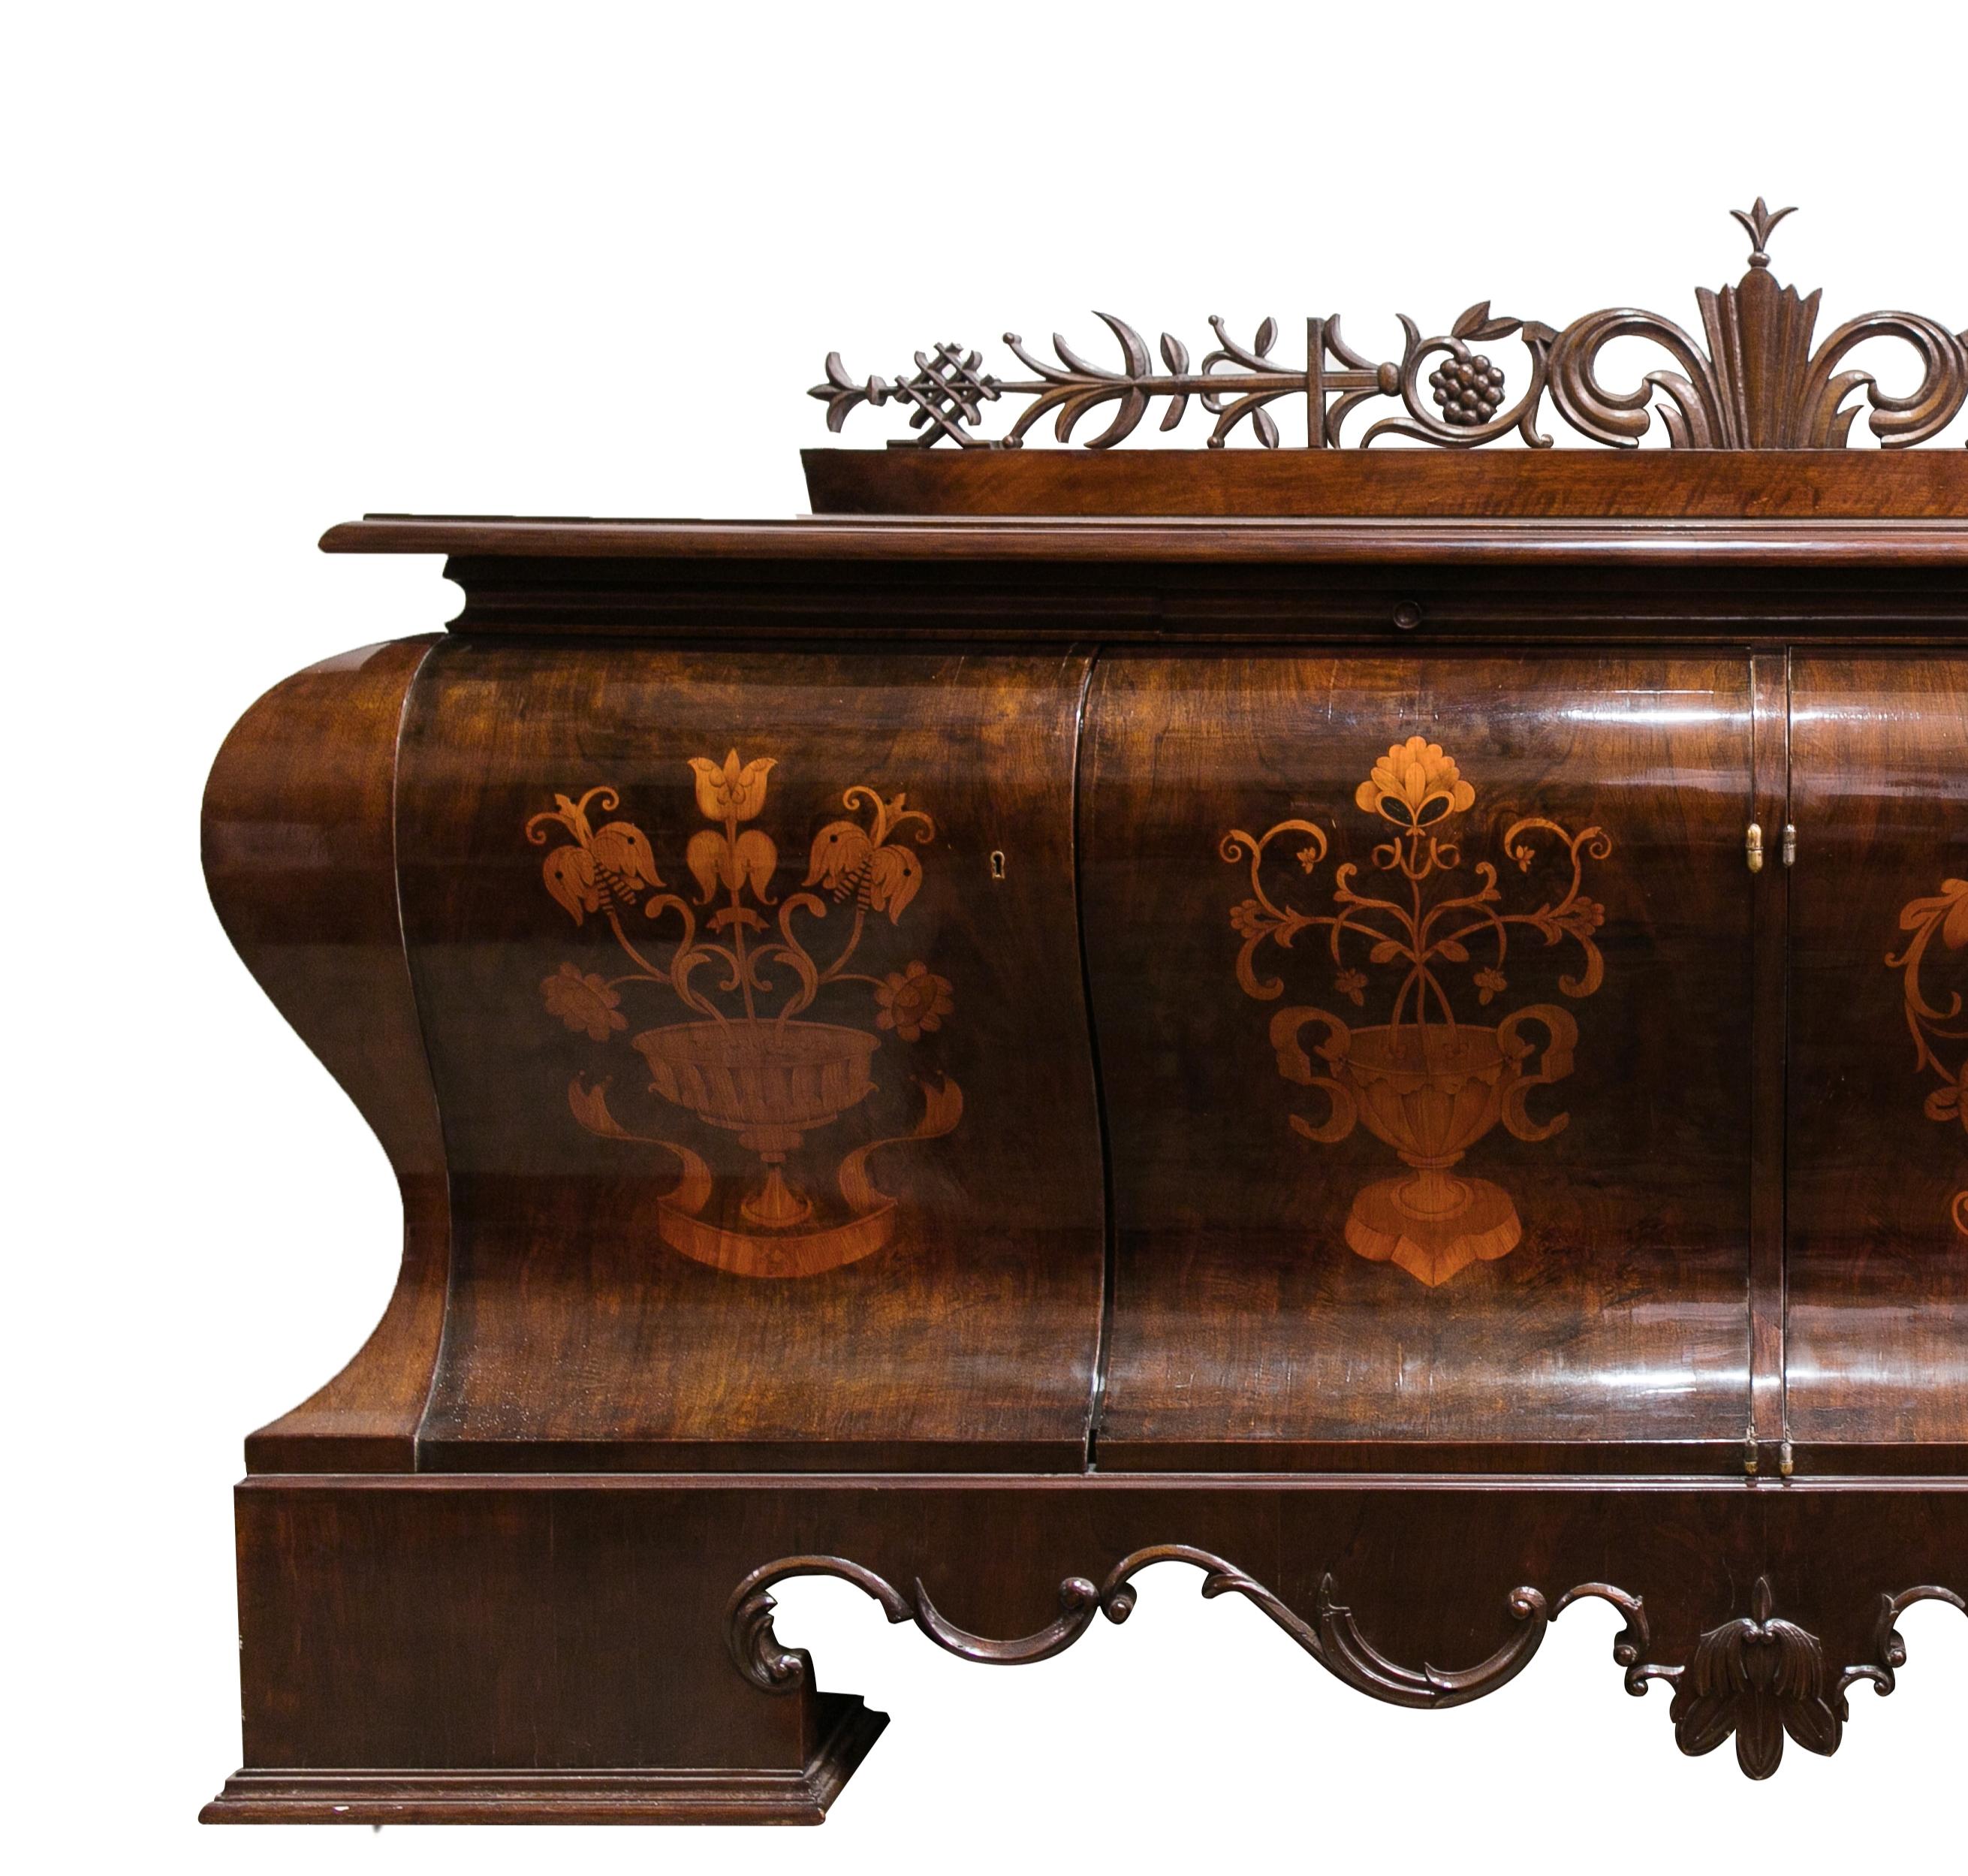 Art Deco sideboard designed by Lajos Kozma, renowned Hungarian architecht and furniture designer, in so-called 